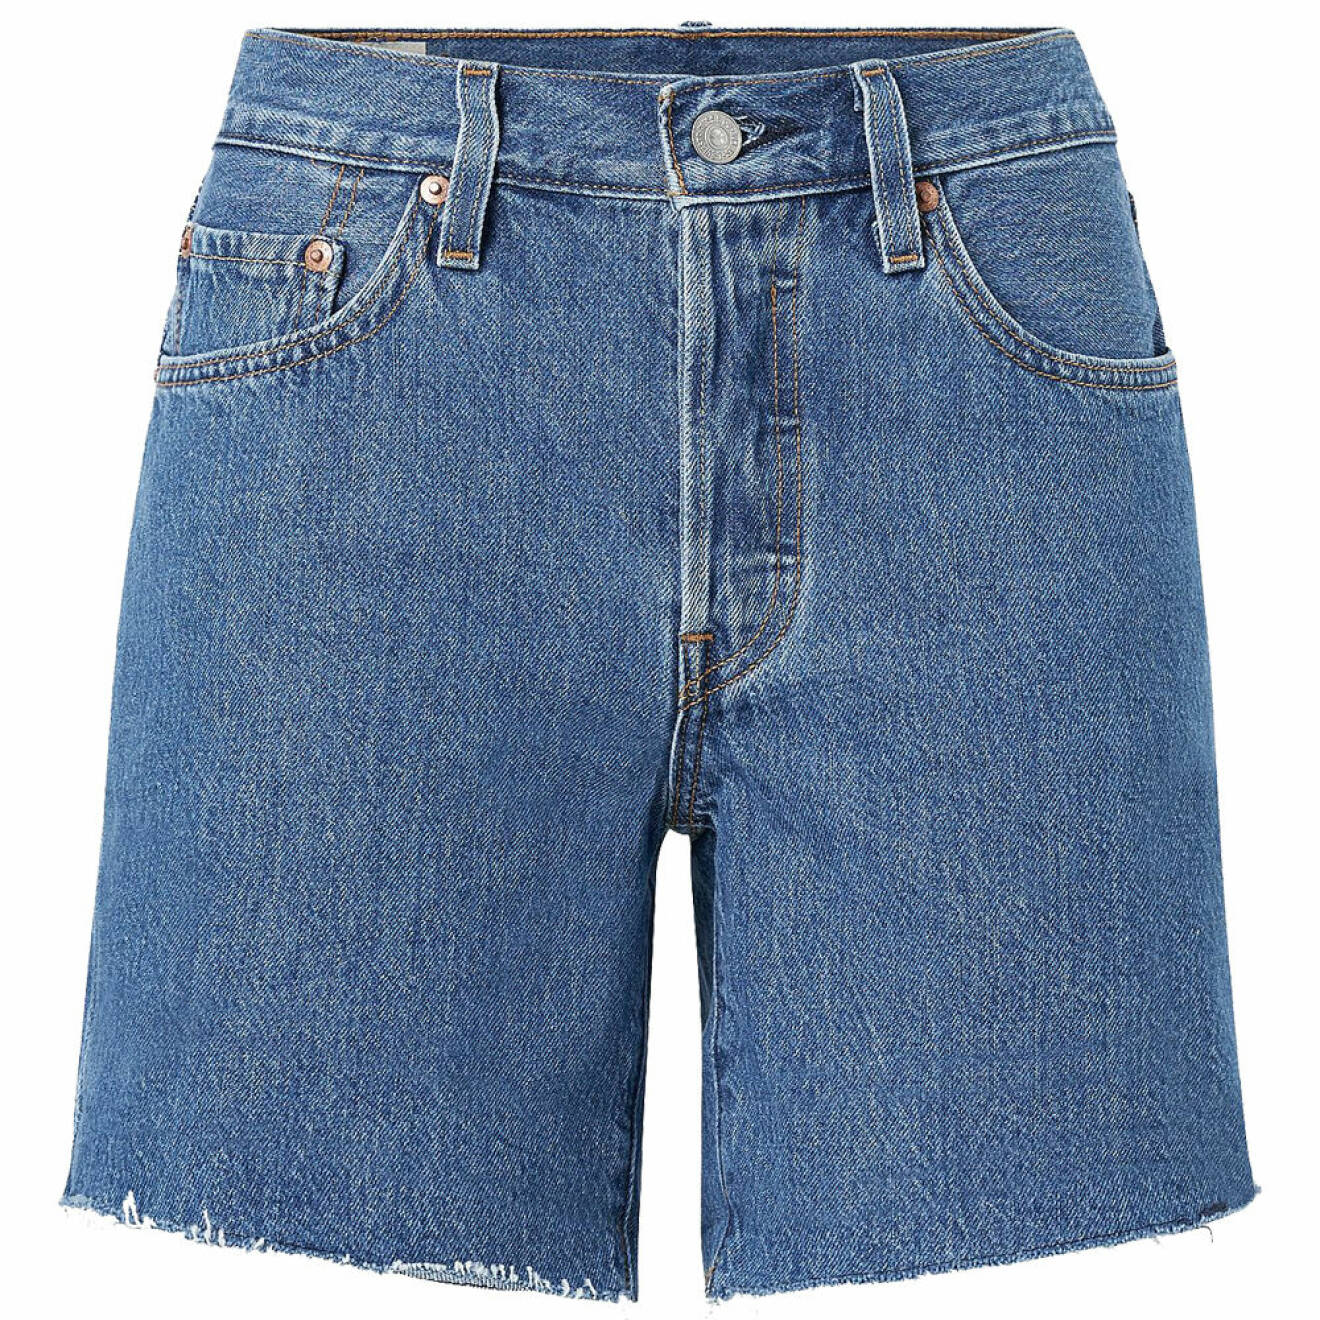 jeansshorts i modell 501 levis